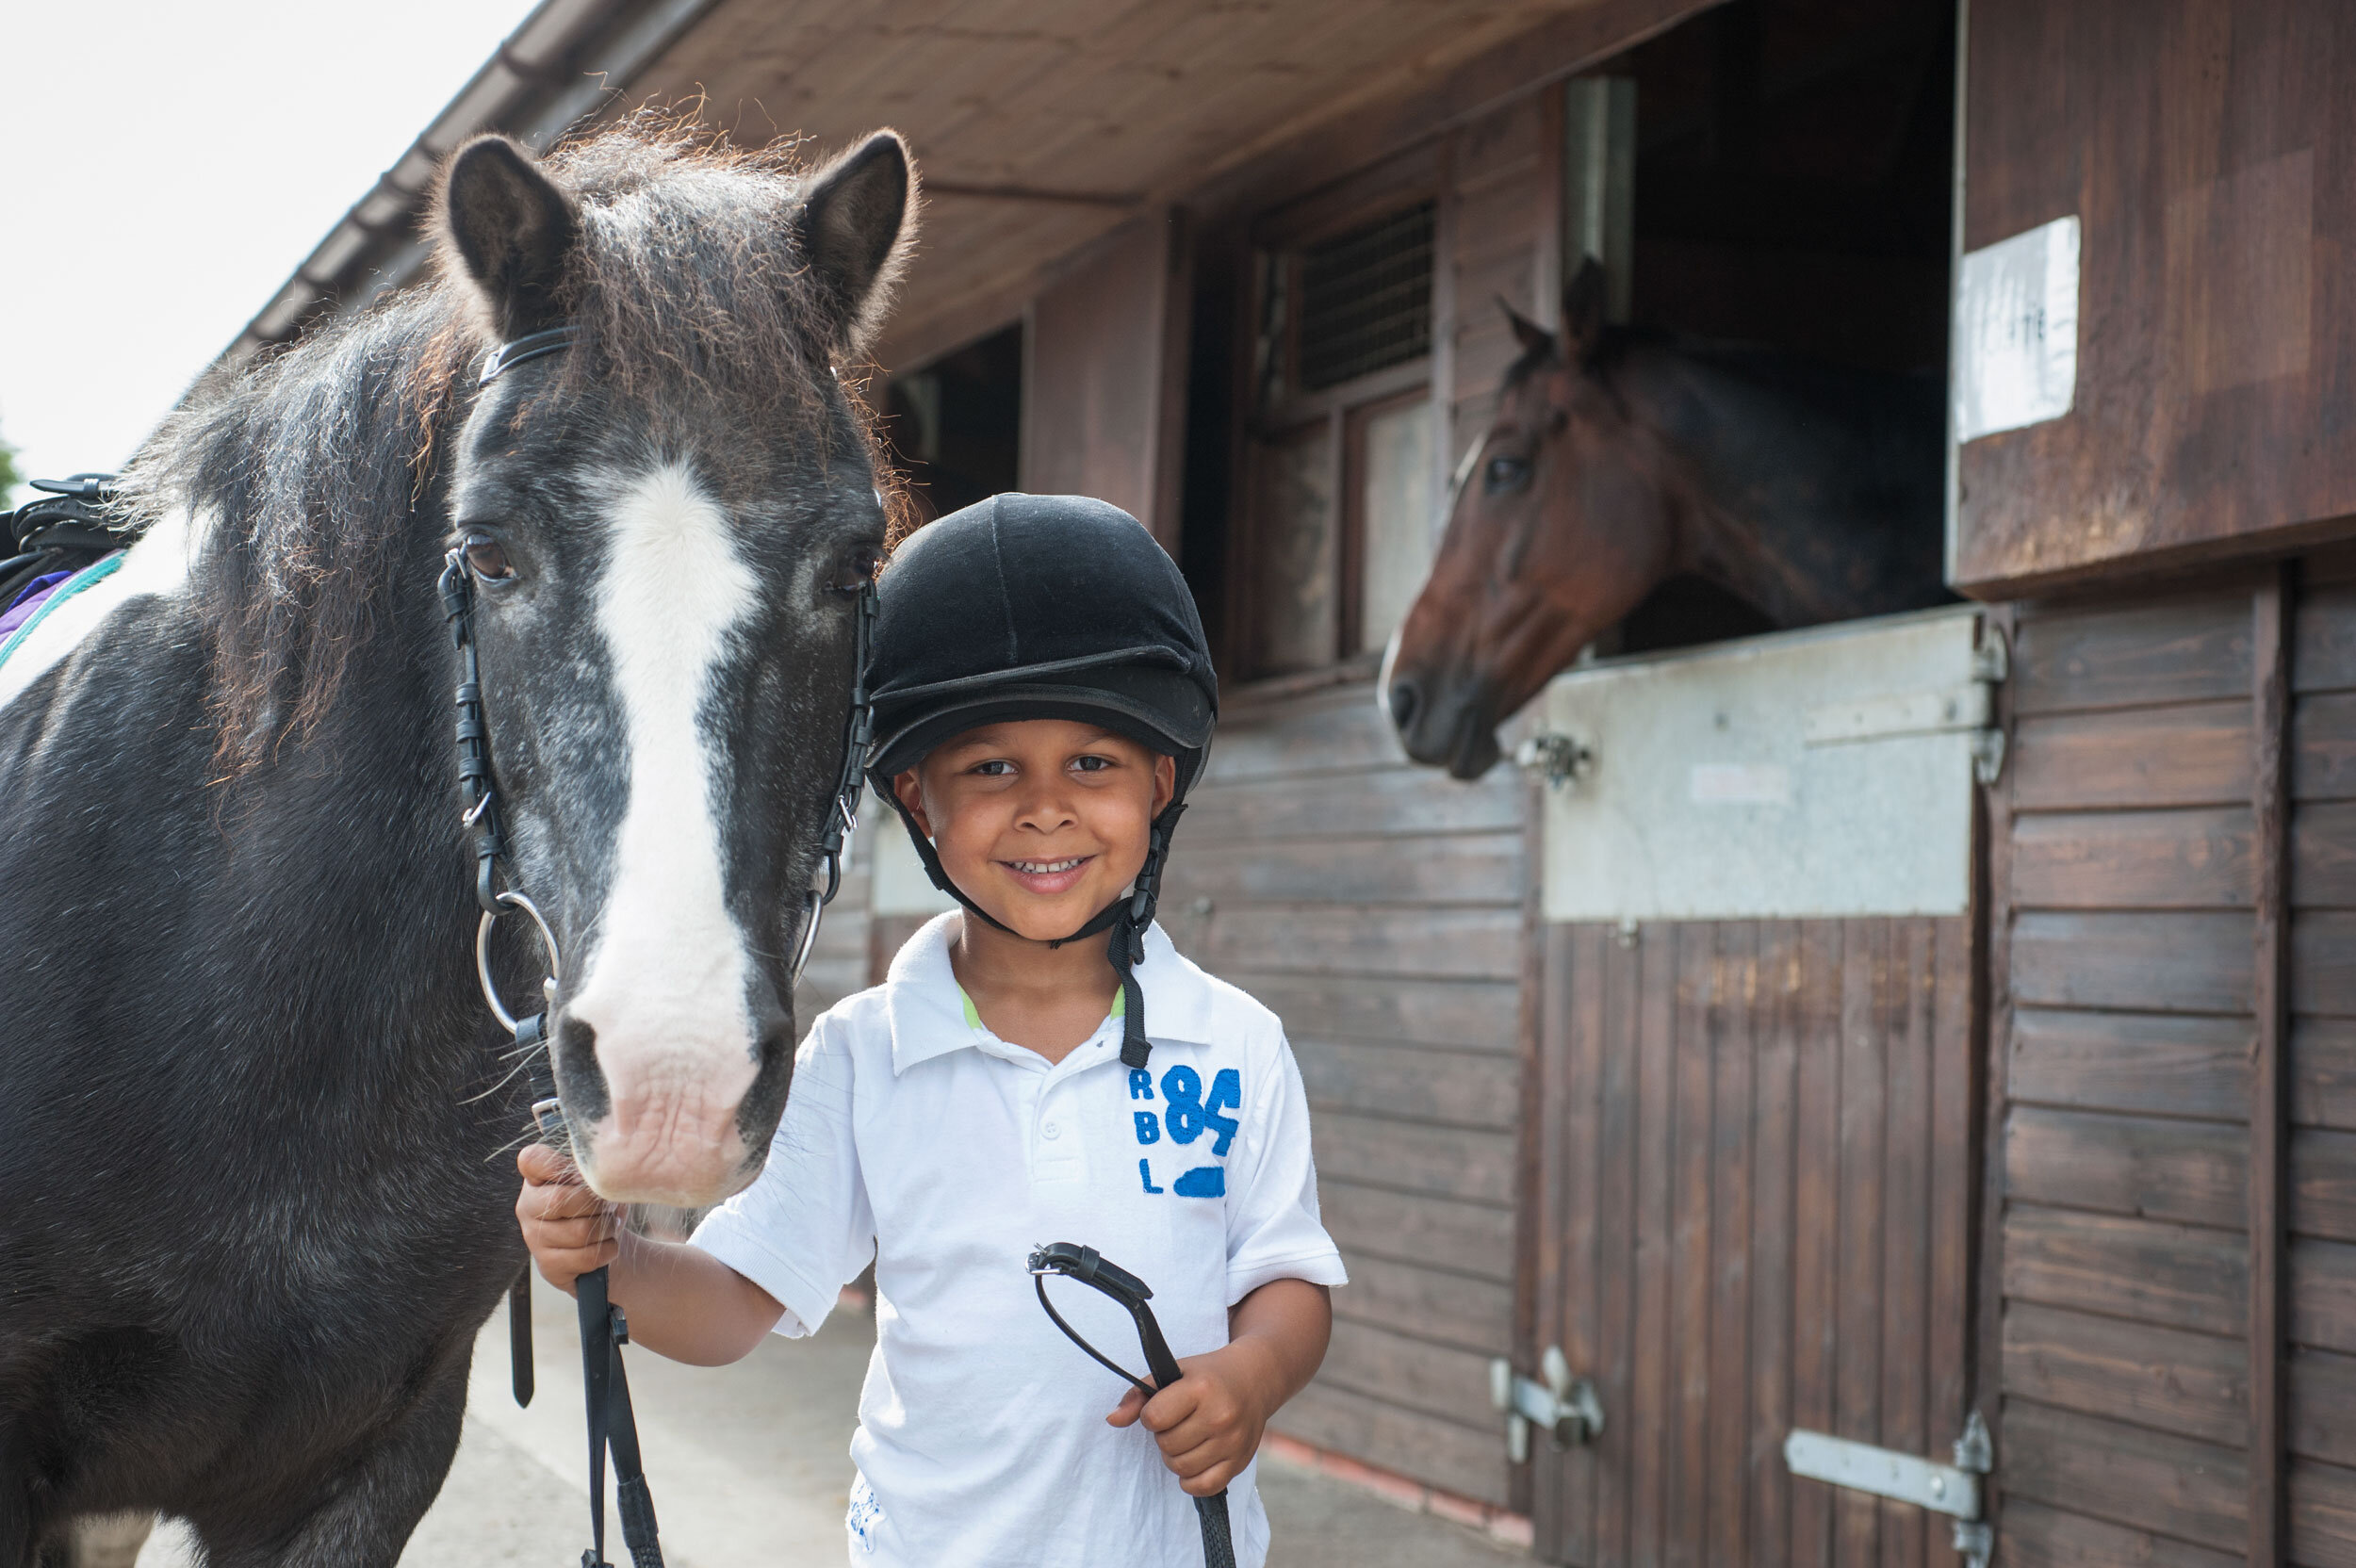  Lee Valley Park. Lee Valley Riding Centre, Lee Bridge Road, London E10. Boy and pony. Shot by Eleanor Bentall, photographer.  